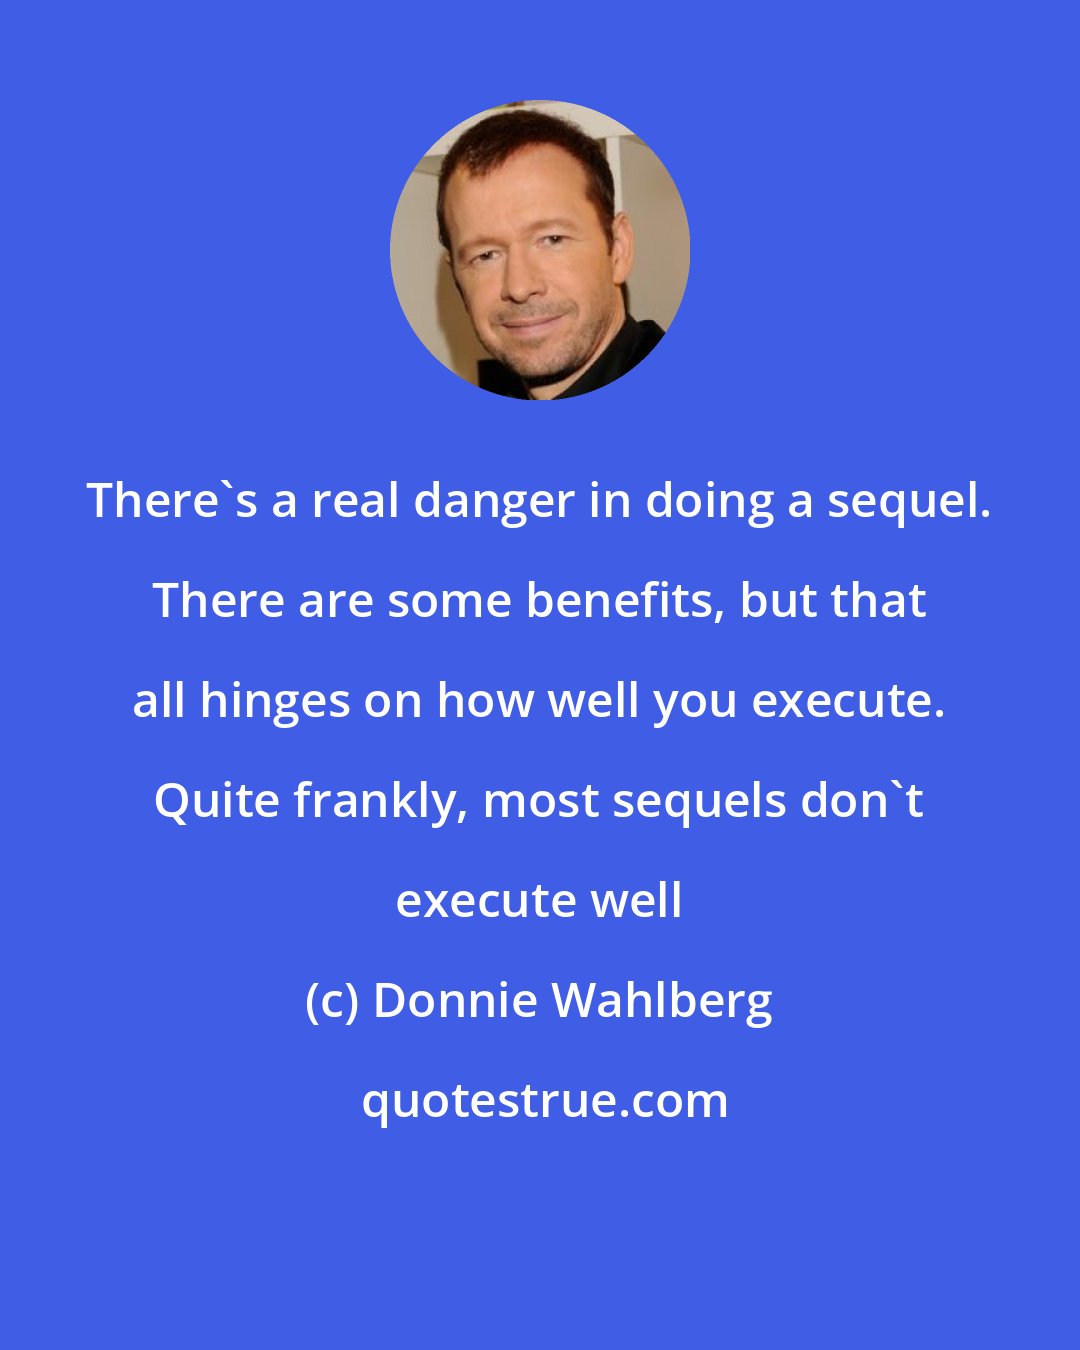 Donnie Wahlberg: There's a real danger in doing a sequel. There are some benefits, but that all hinges on how well you execute. Quite frankly, most sequels don't execute well